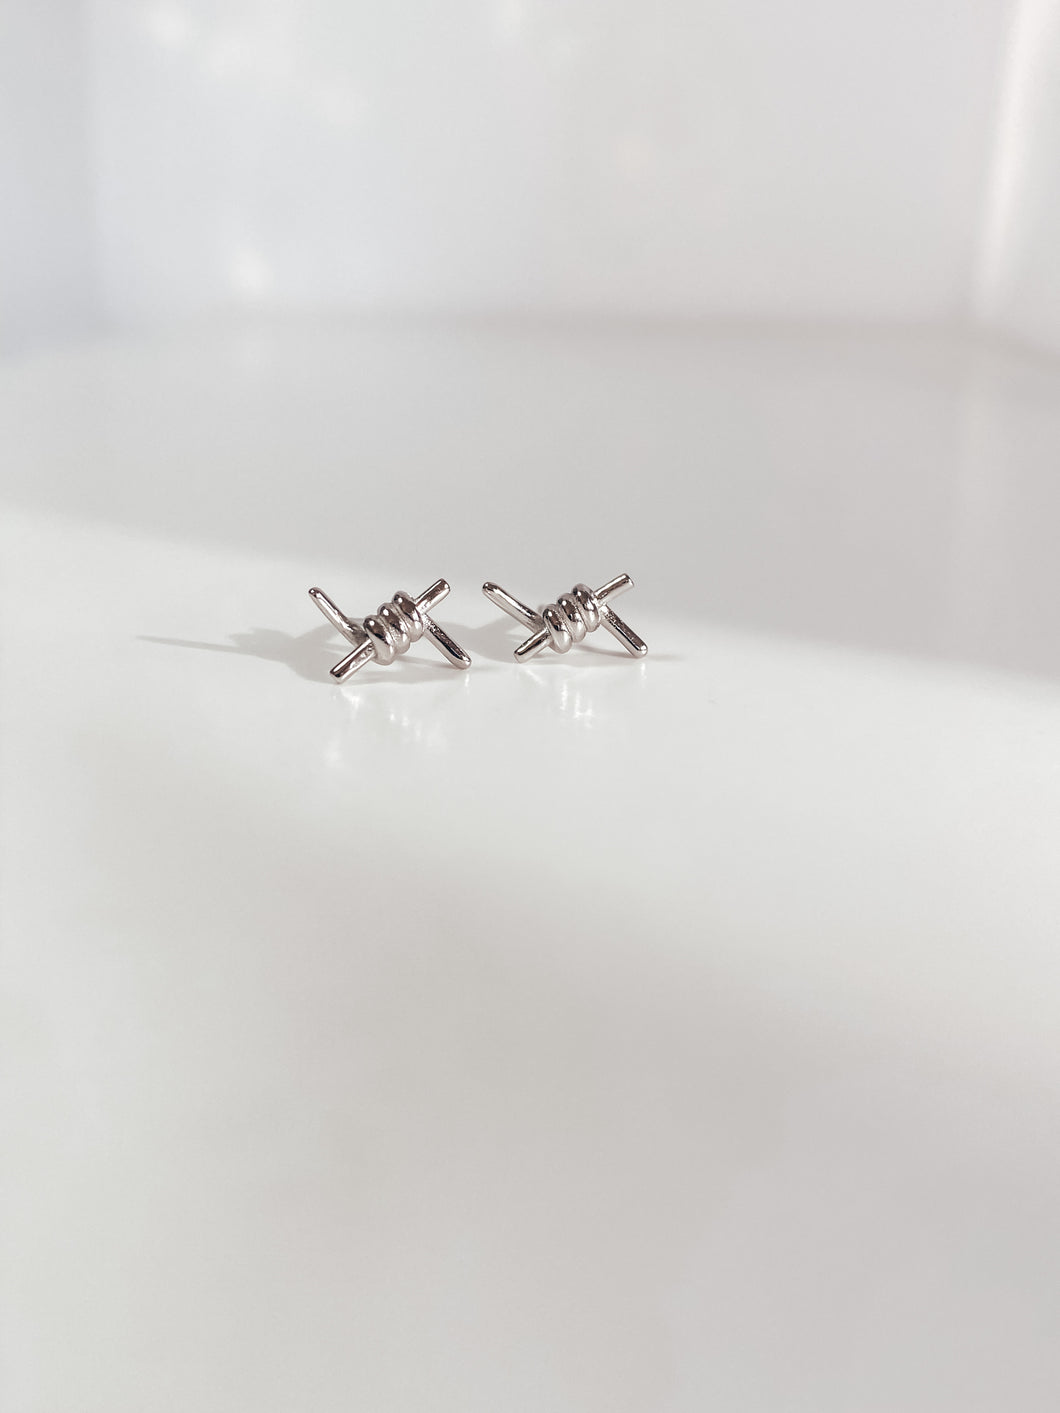 Sterling Silver Barbed Wire Studs